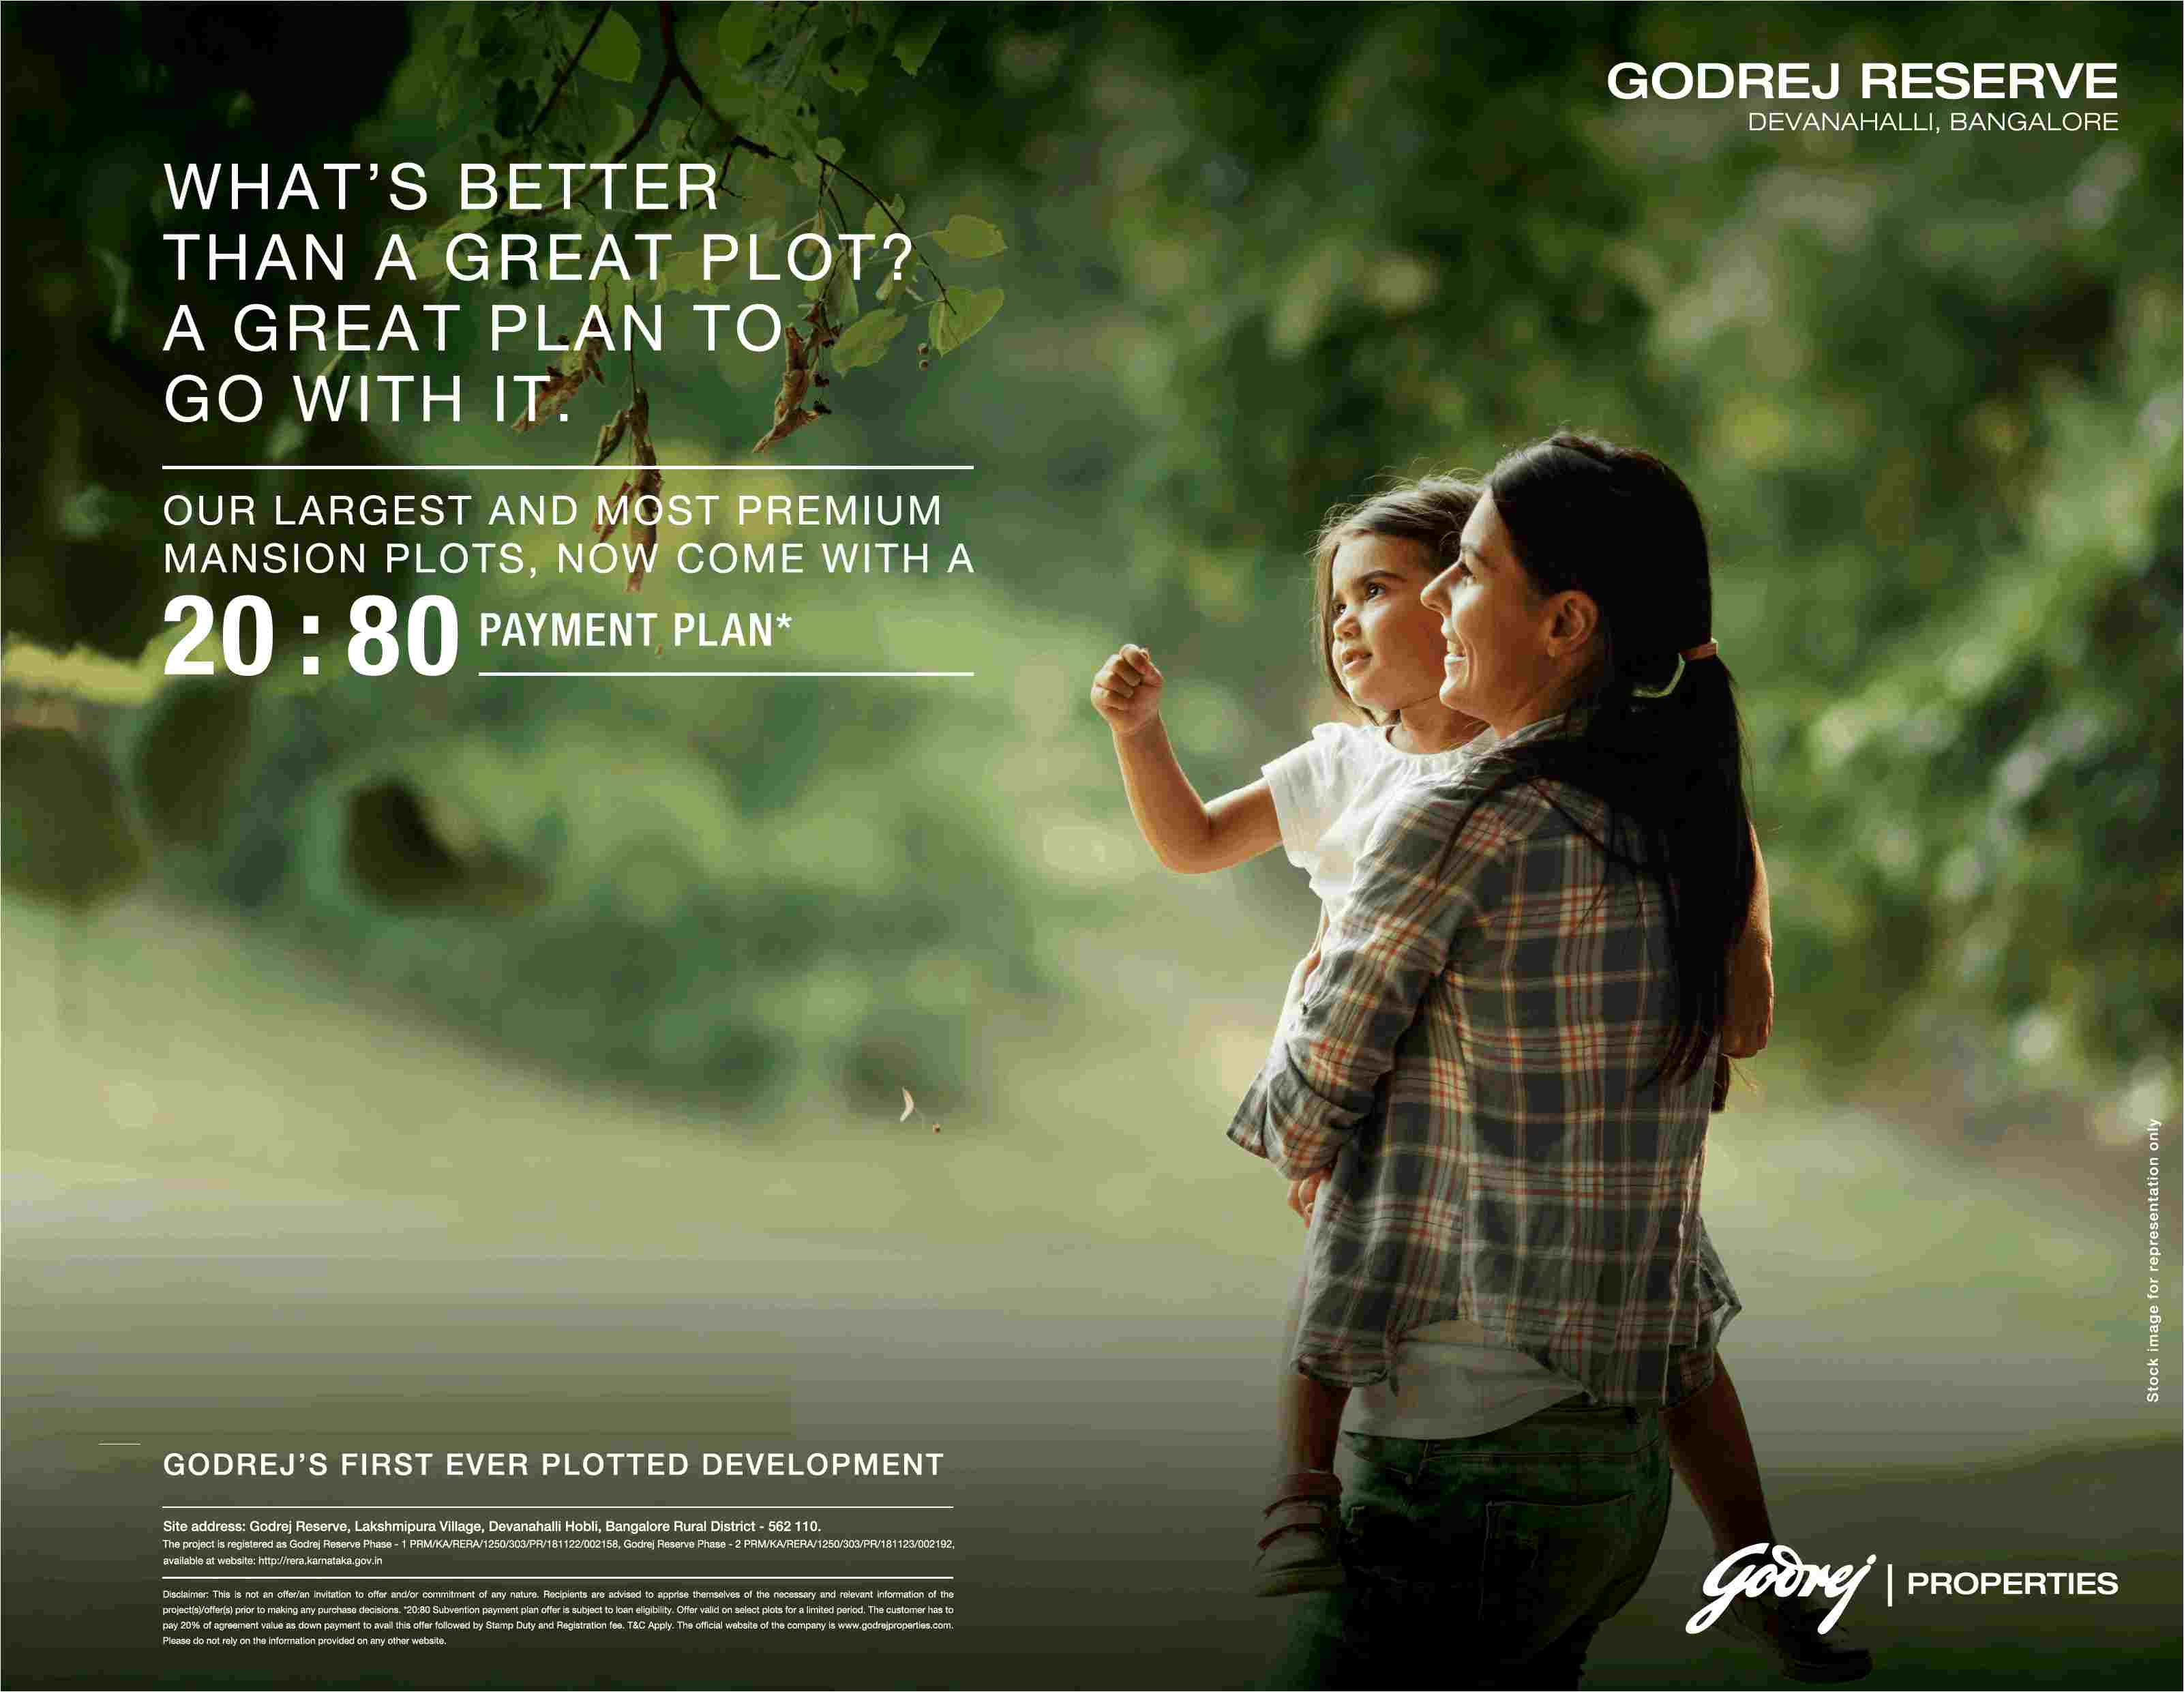 Avail the 20:80 payment plan at Godrej Reserve in Devanahalli, Bangalore Update